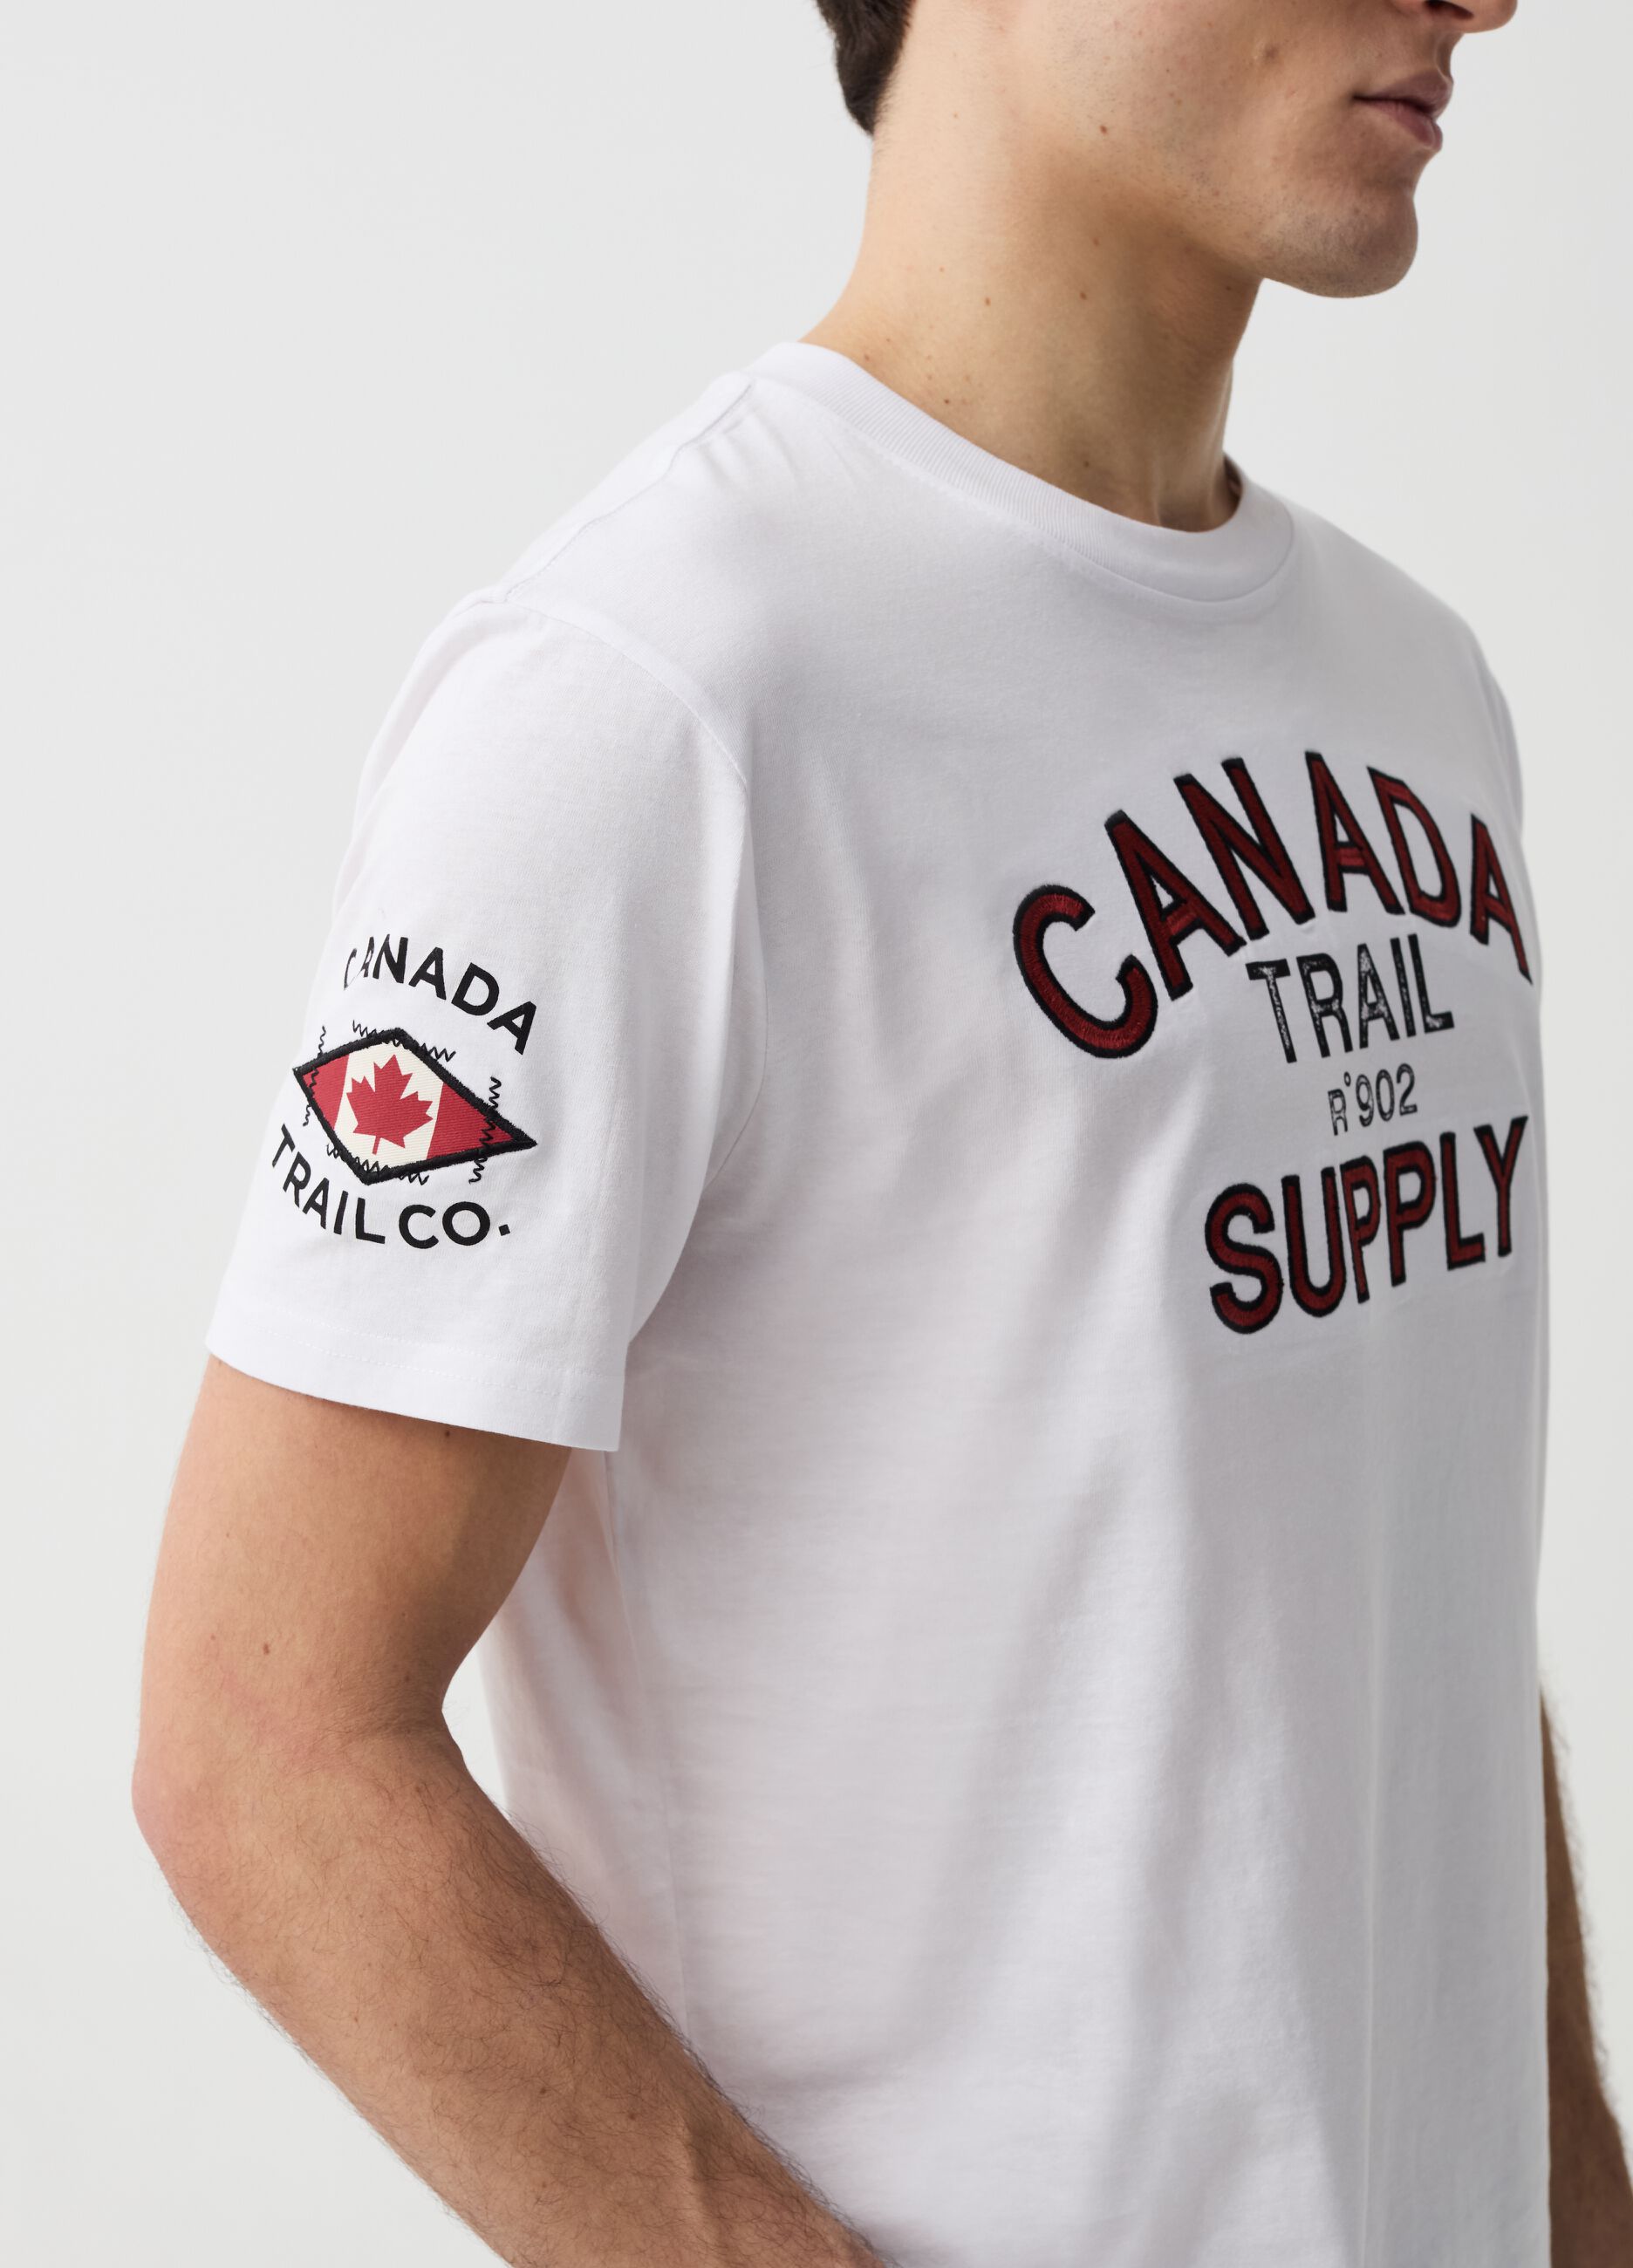 T-shirt with embroidery and Canada Trail print